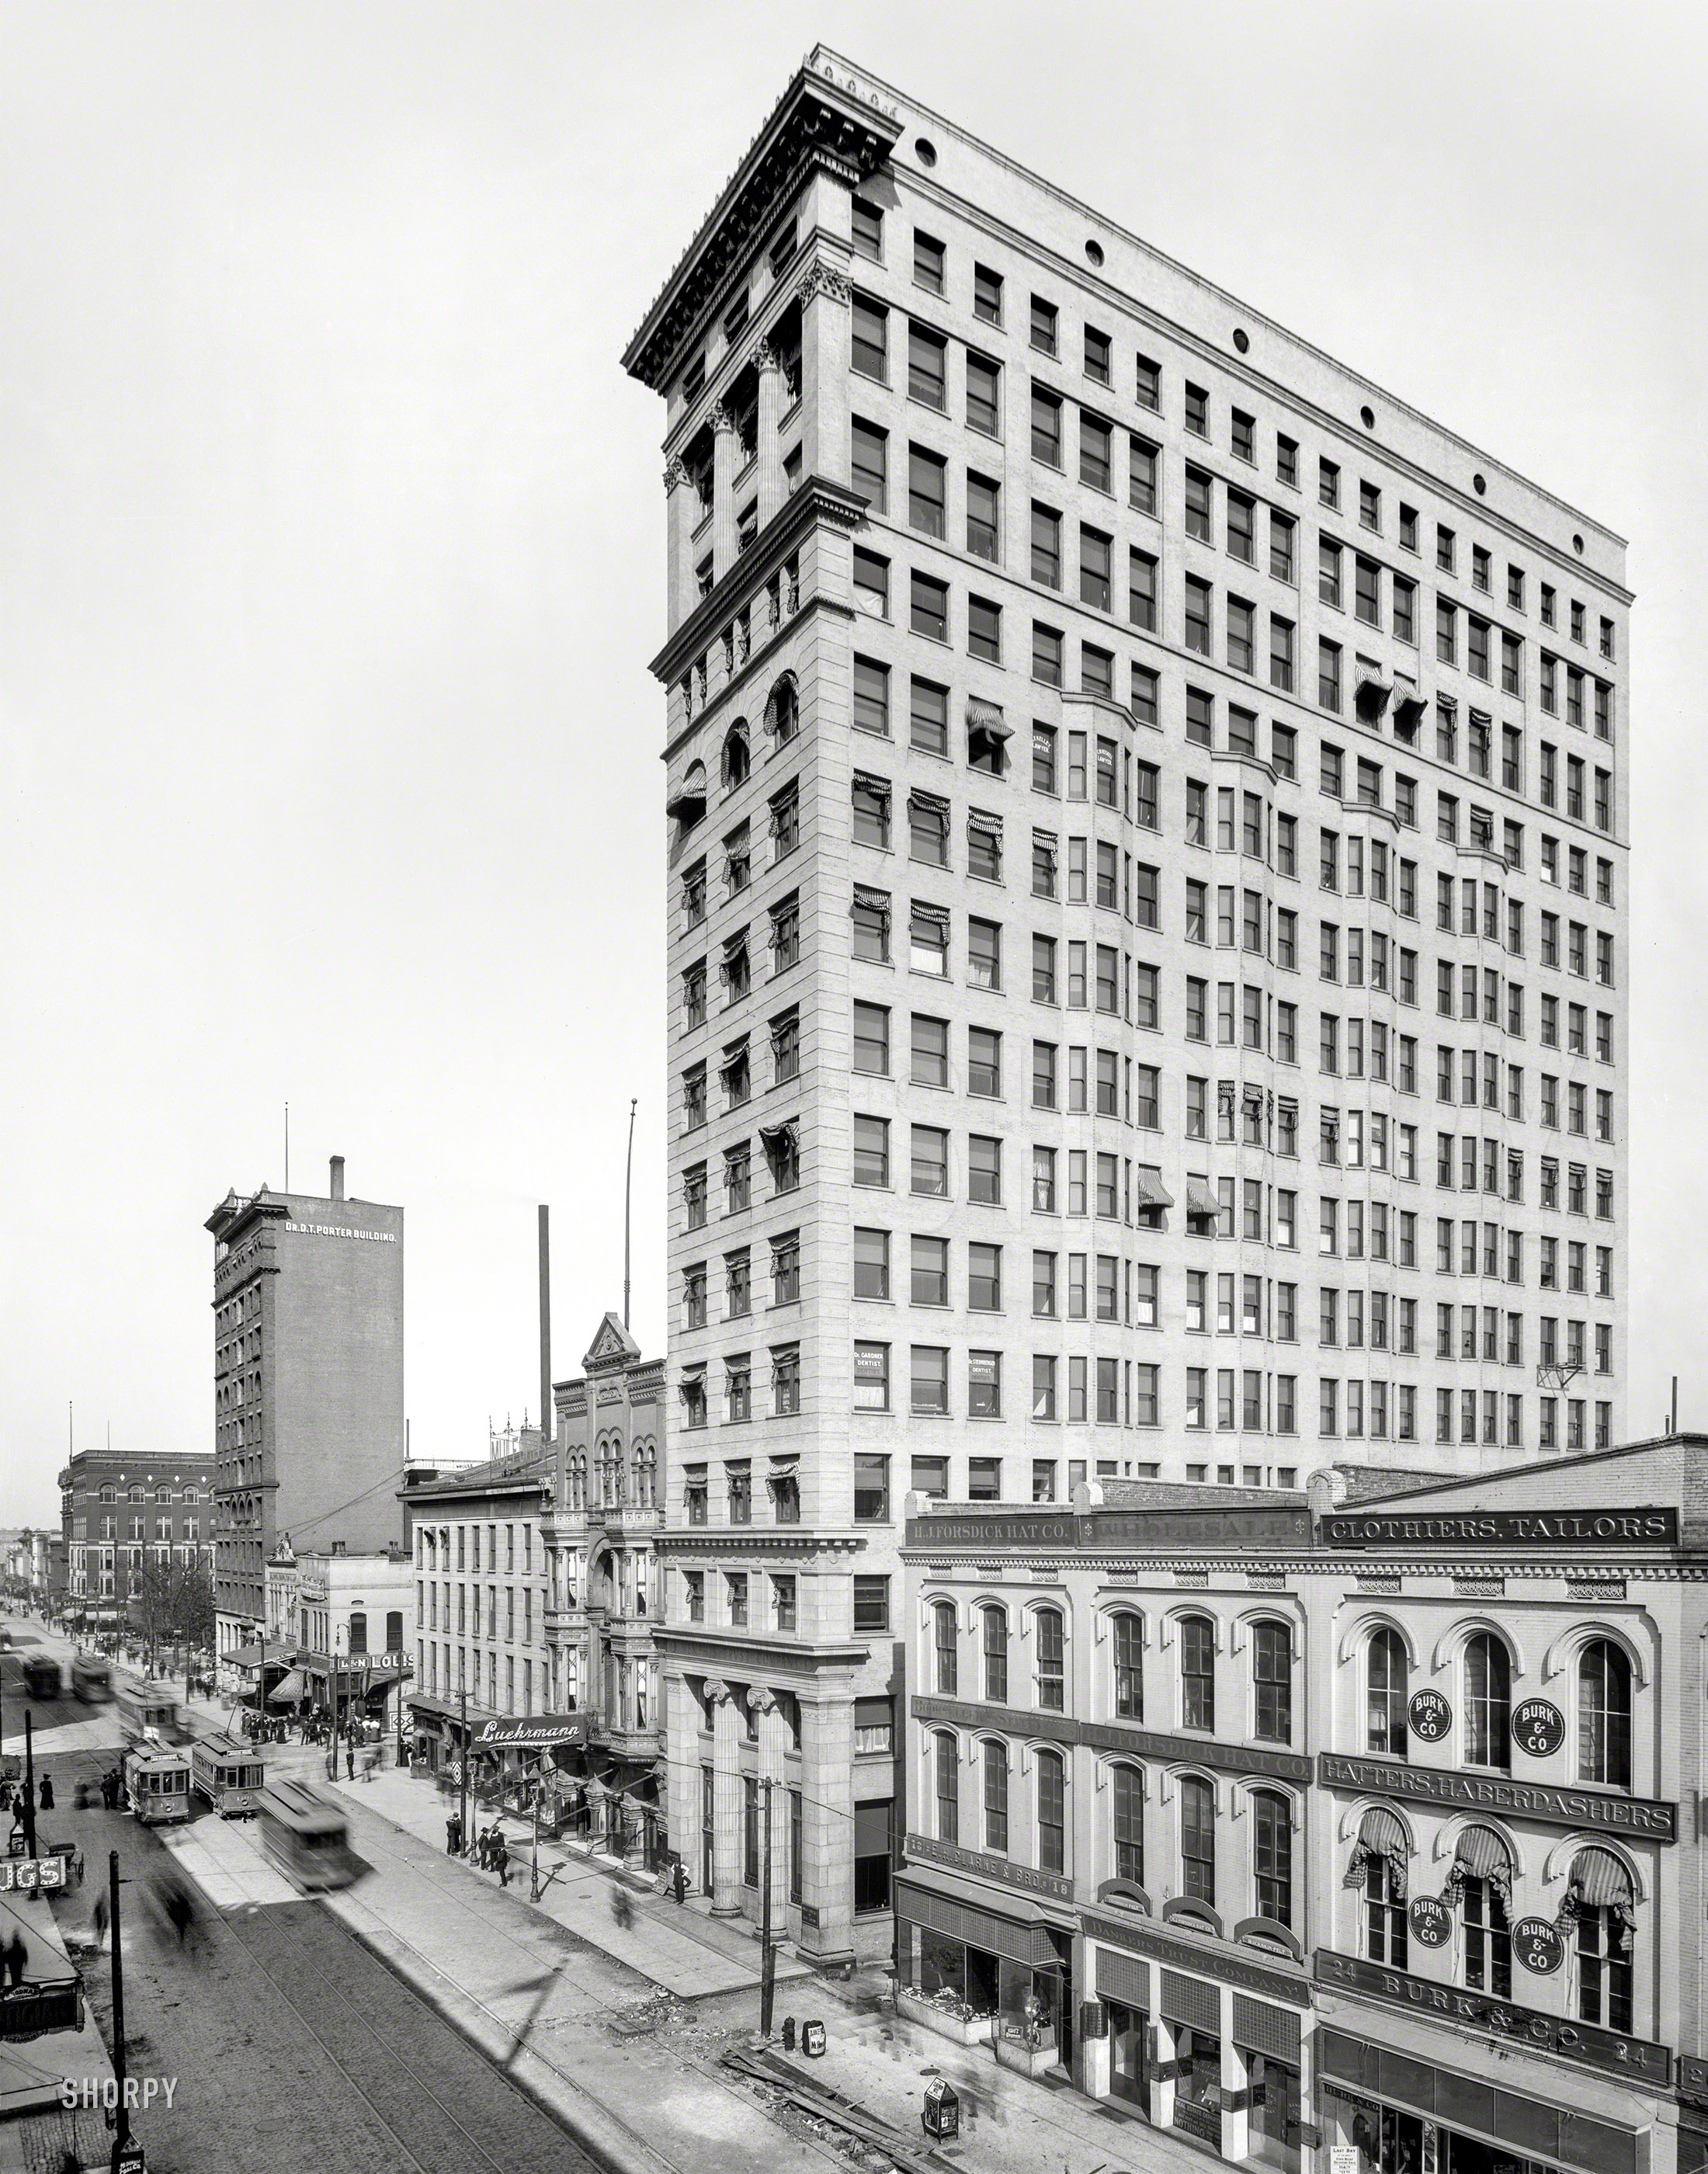 1906. "Memphis Trust Building, Main Street." Completed 1904, and then doubled in width 10 years later. Now an apartment building. View full size.